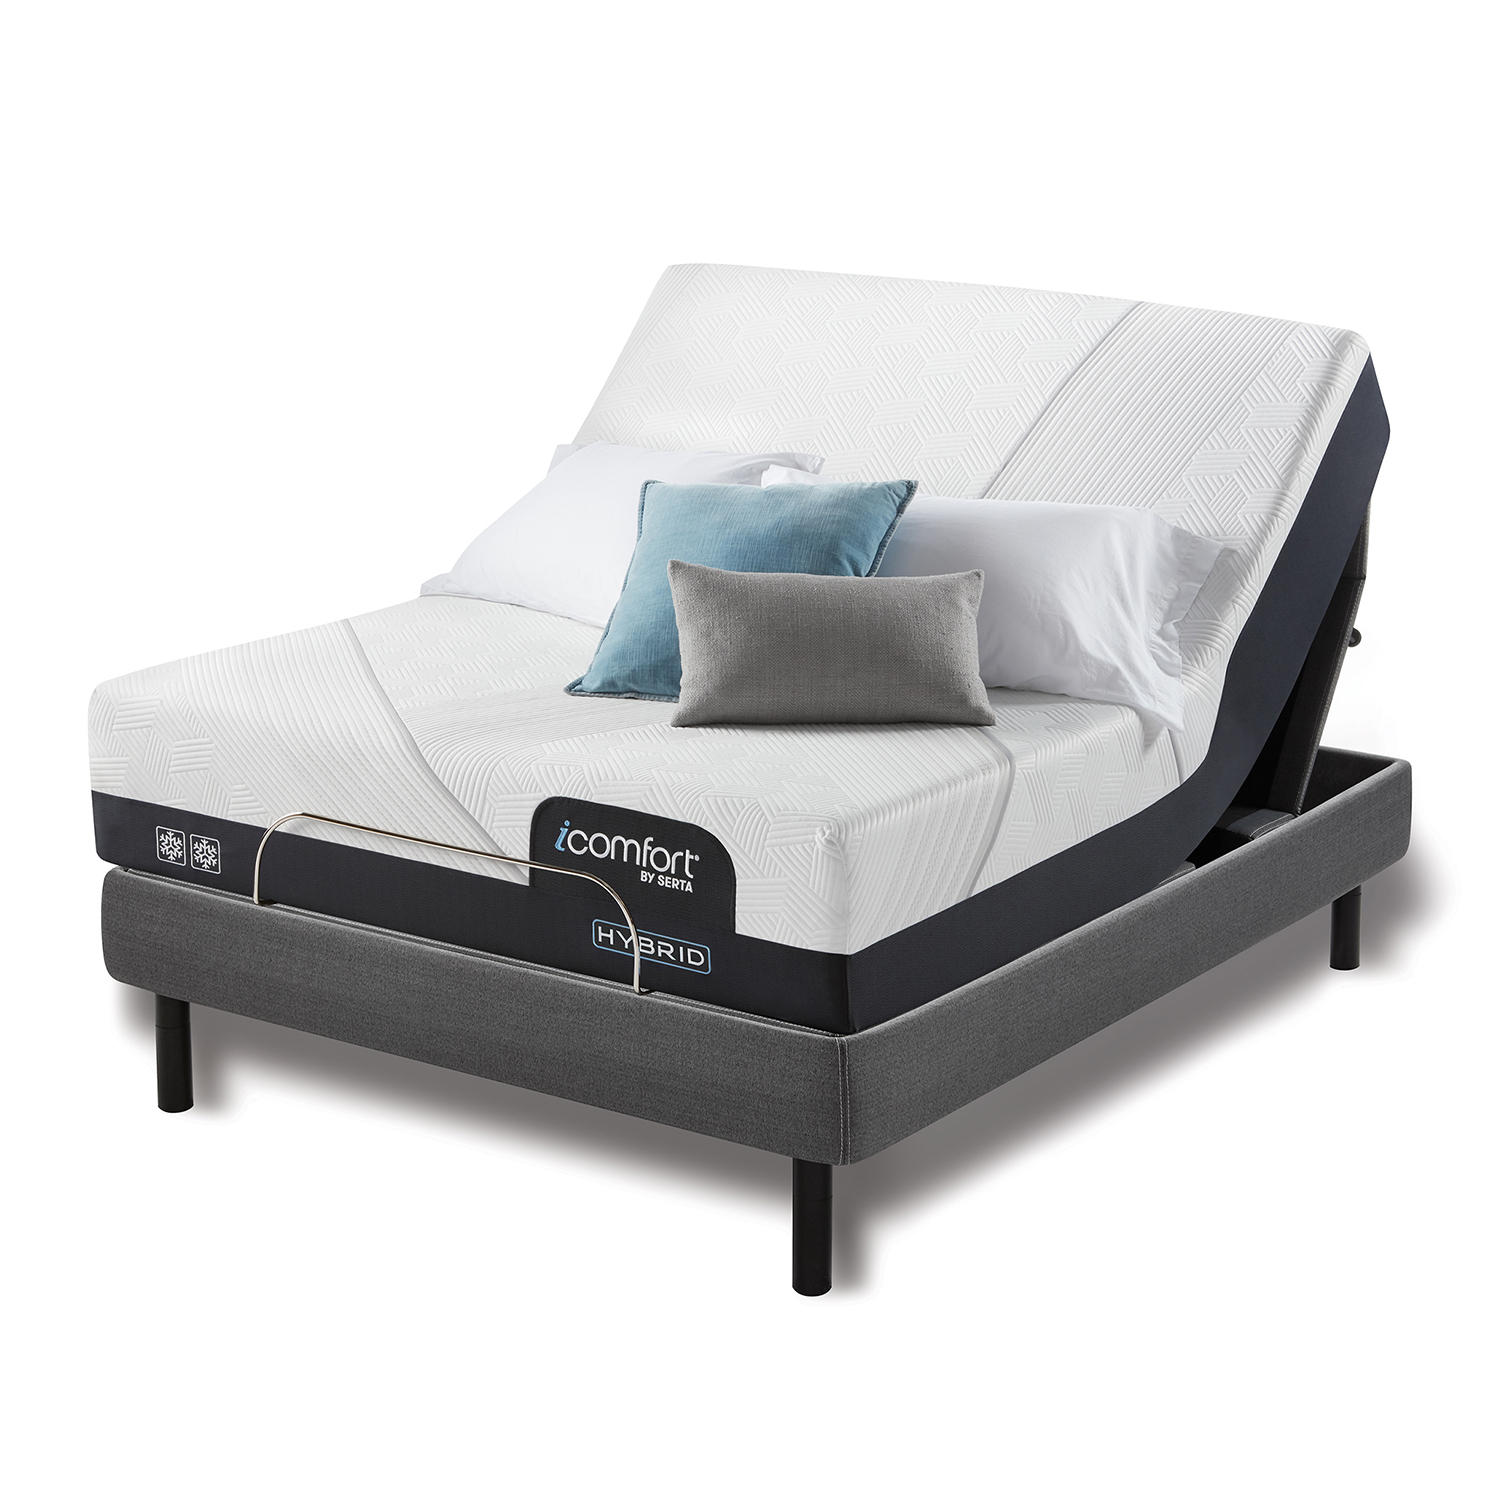 Up to $800 off on Mattresses